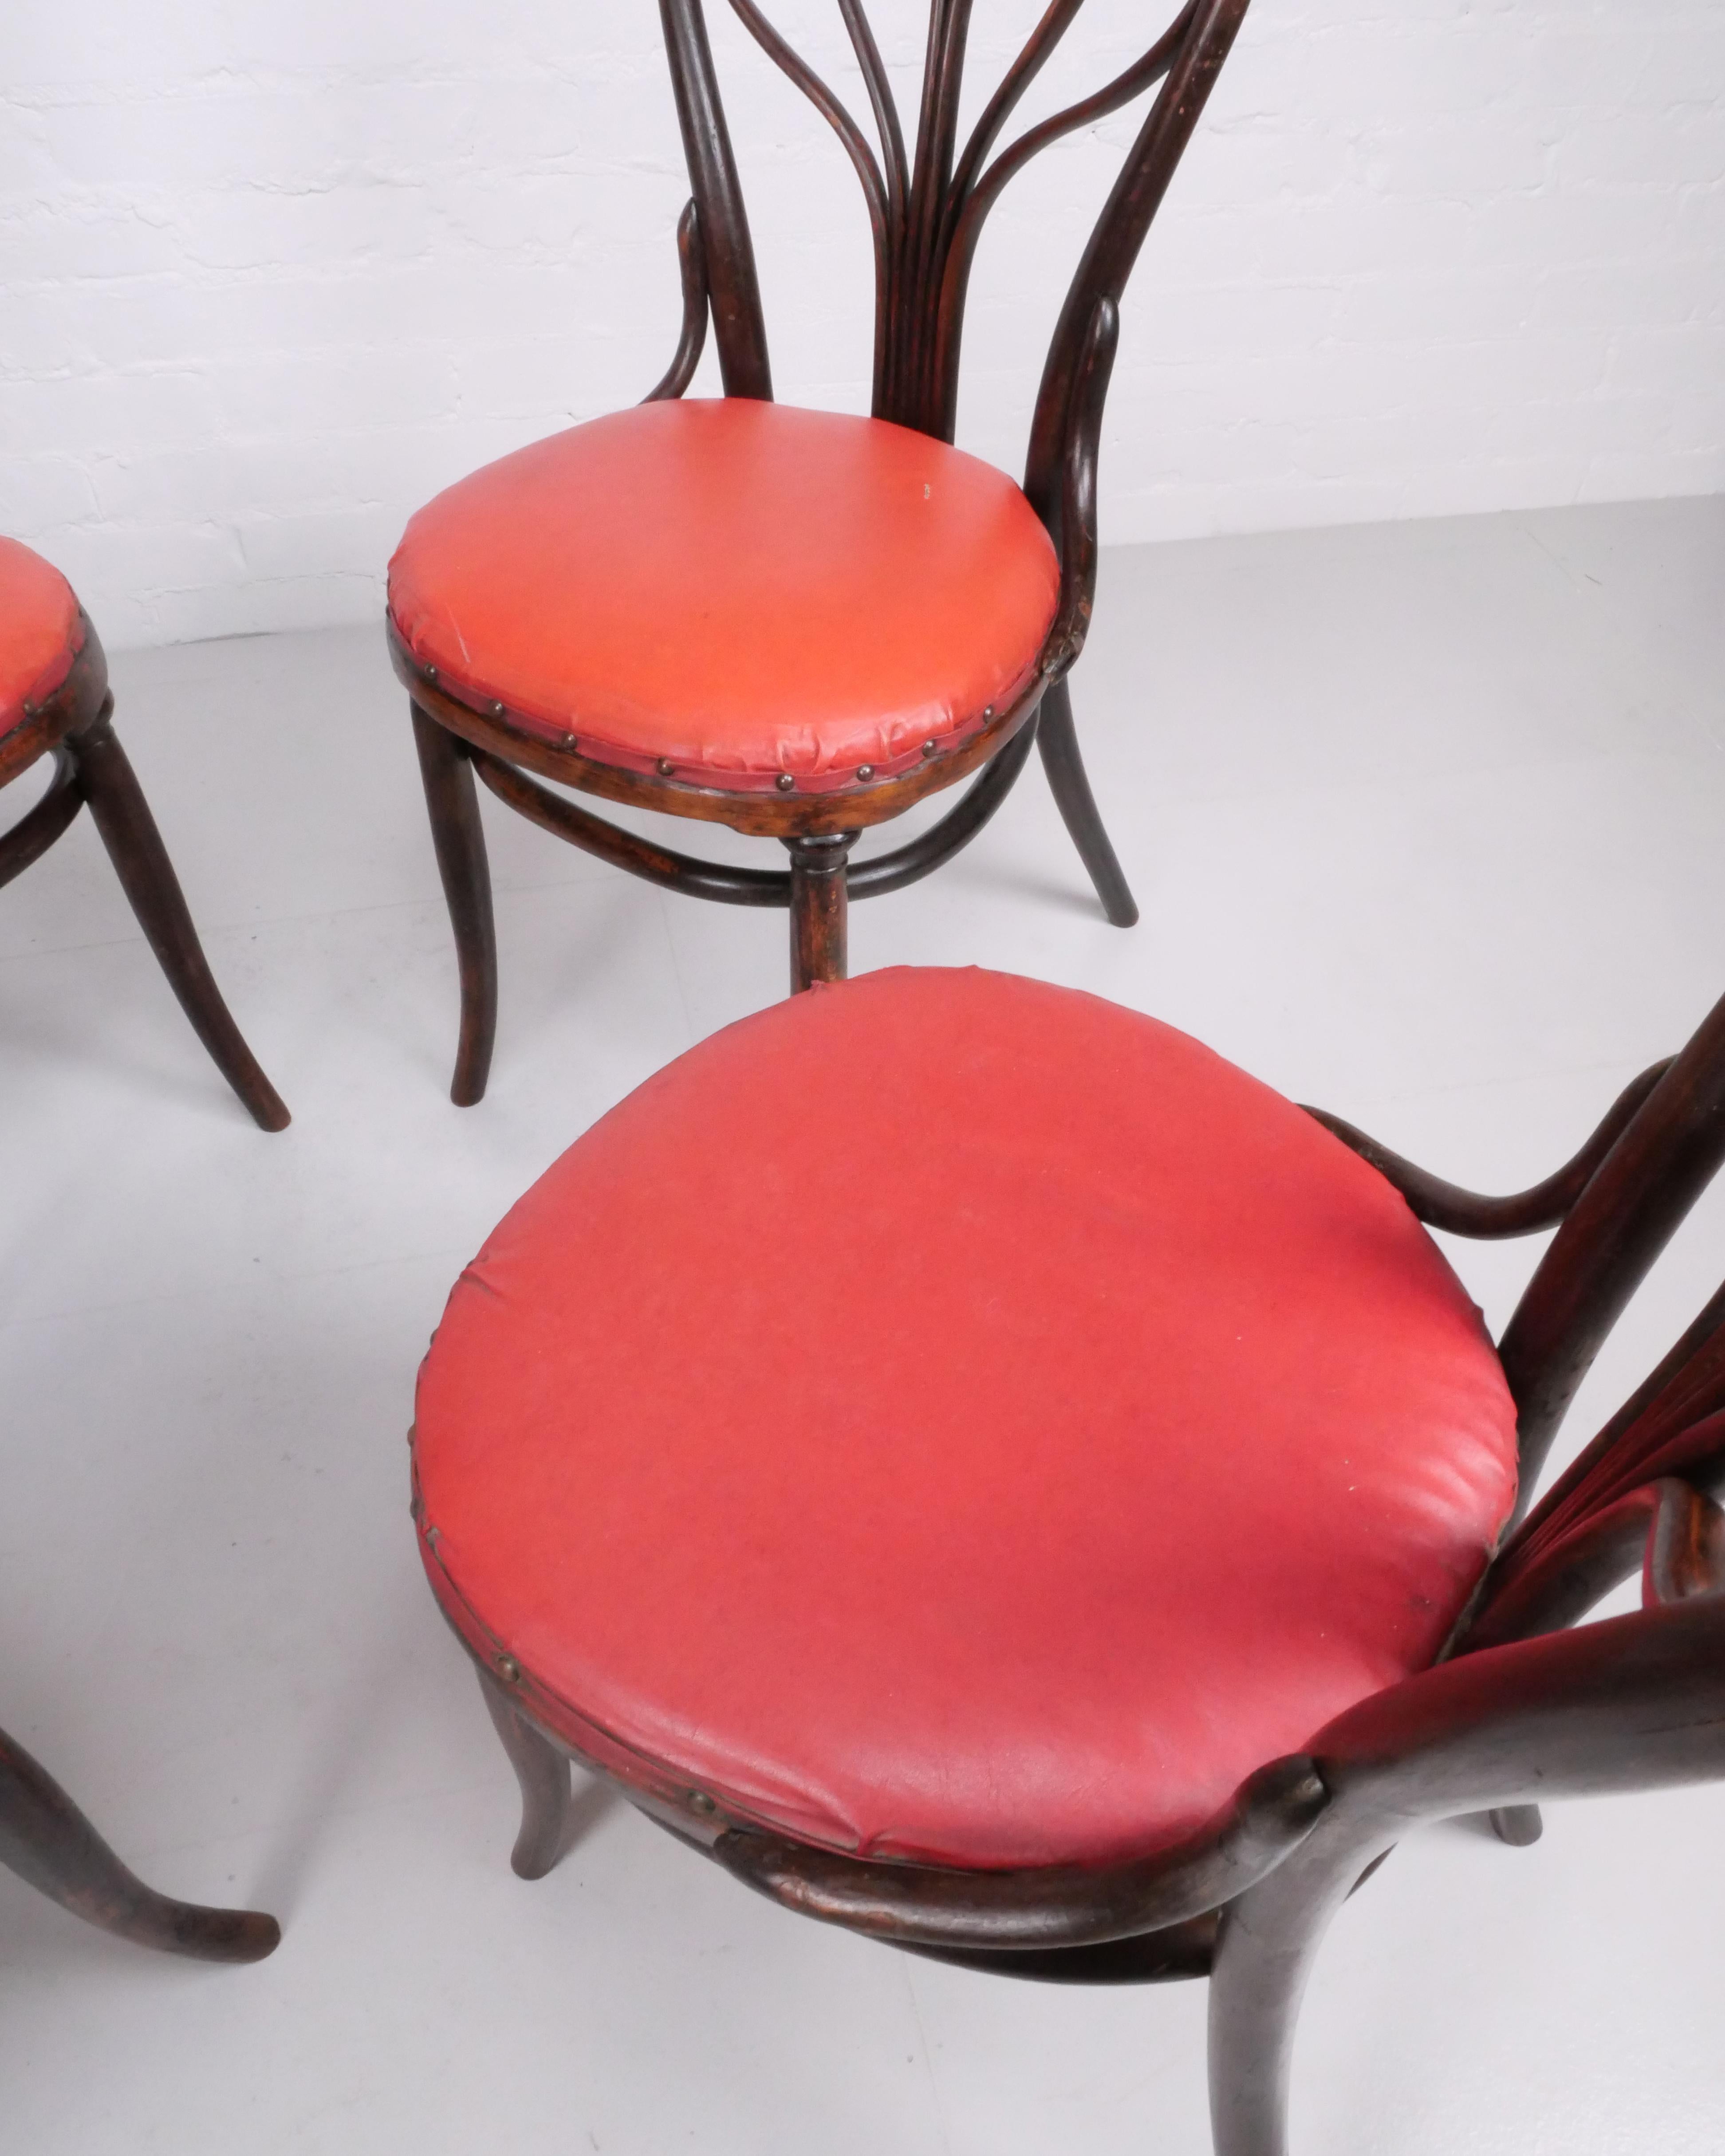 Set of 4 no.25 dining chairs by Gebrüder Thonet, c. 1870 For Sale 2